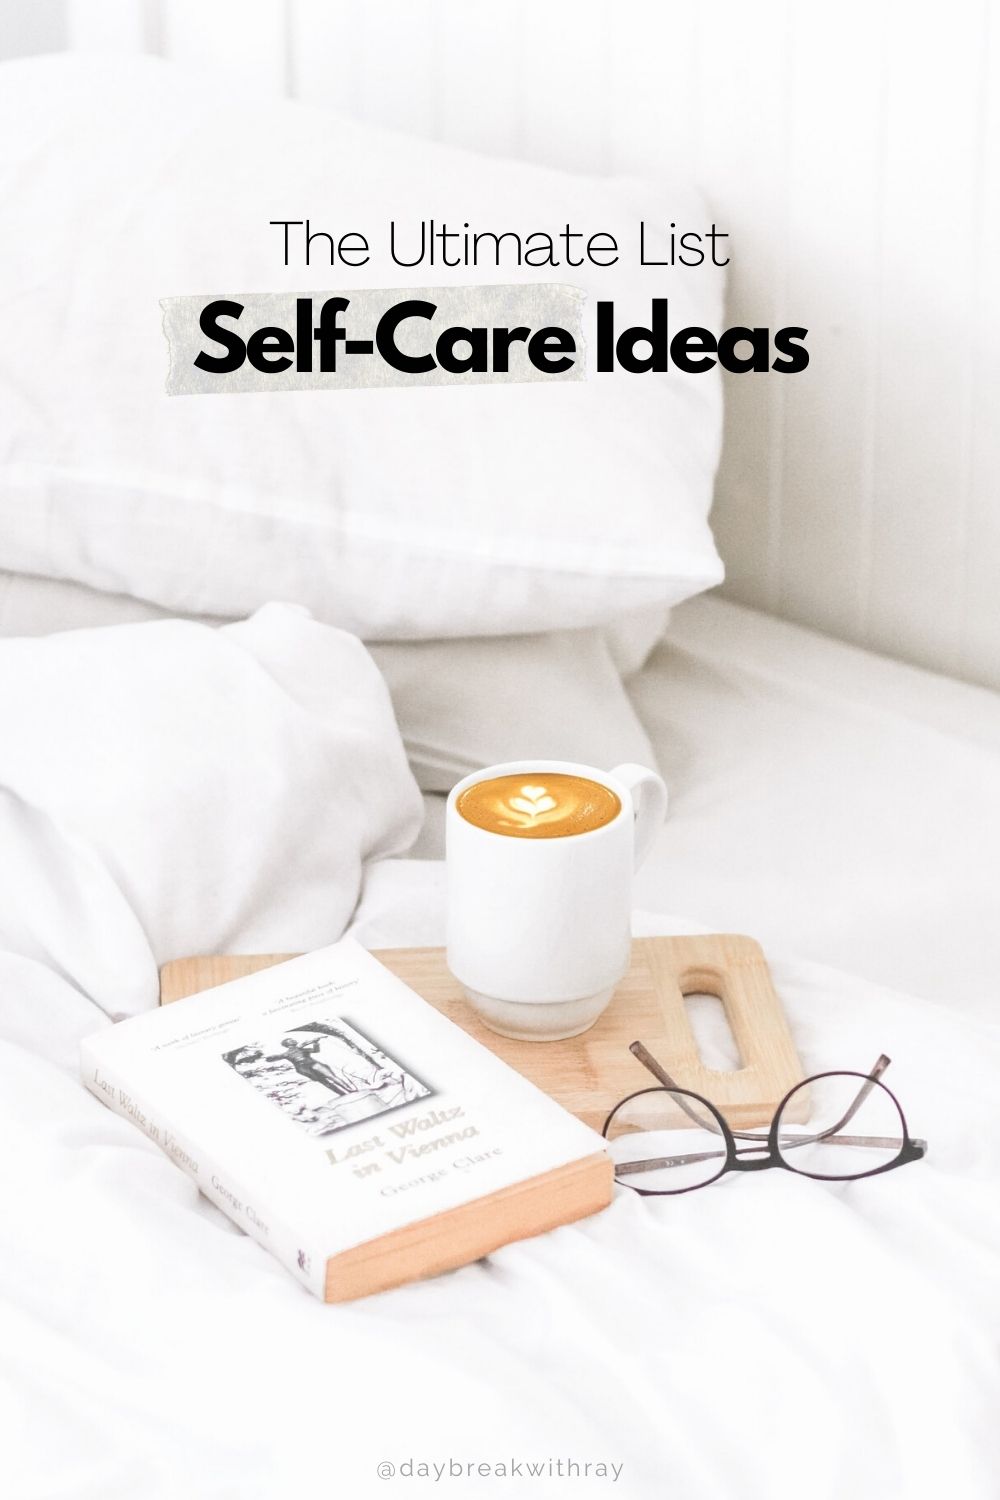 The Ultimate List of Self-Care Ideas is here - Daybreak with Ray (@daybreakwithray)